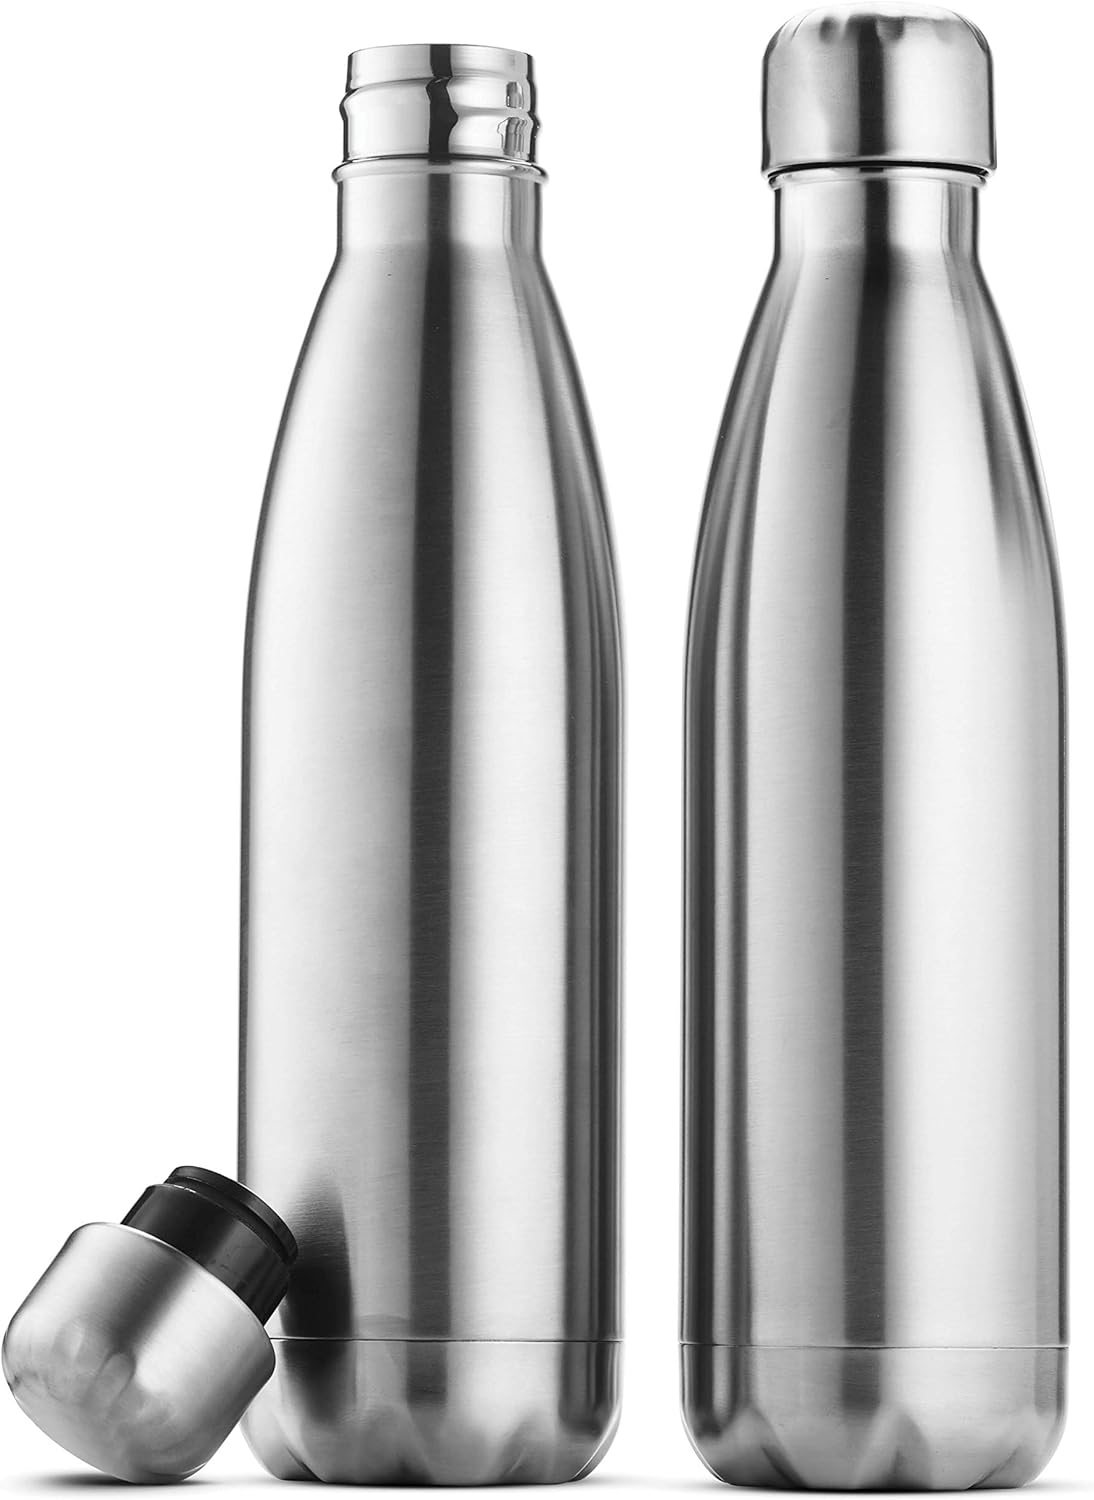 17oz Triple-Insulated Stainless Steel Water Bottle Set, Keeps Hot & Cold, Leakproof Lids - For Travel, Picnic & Camping